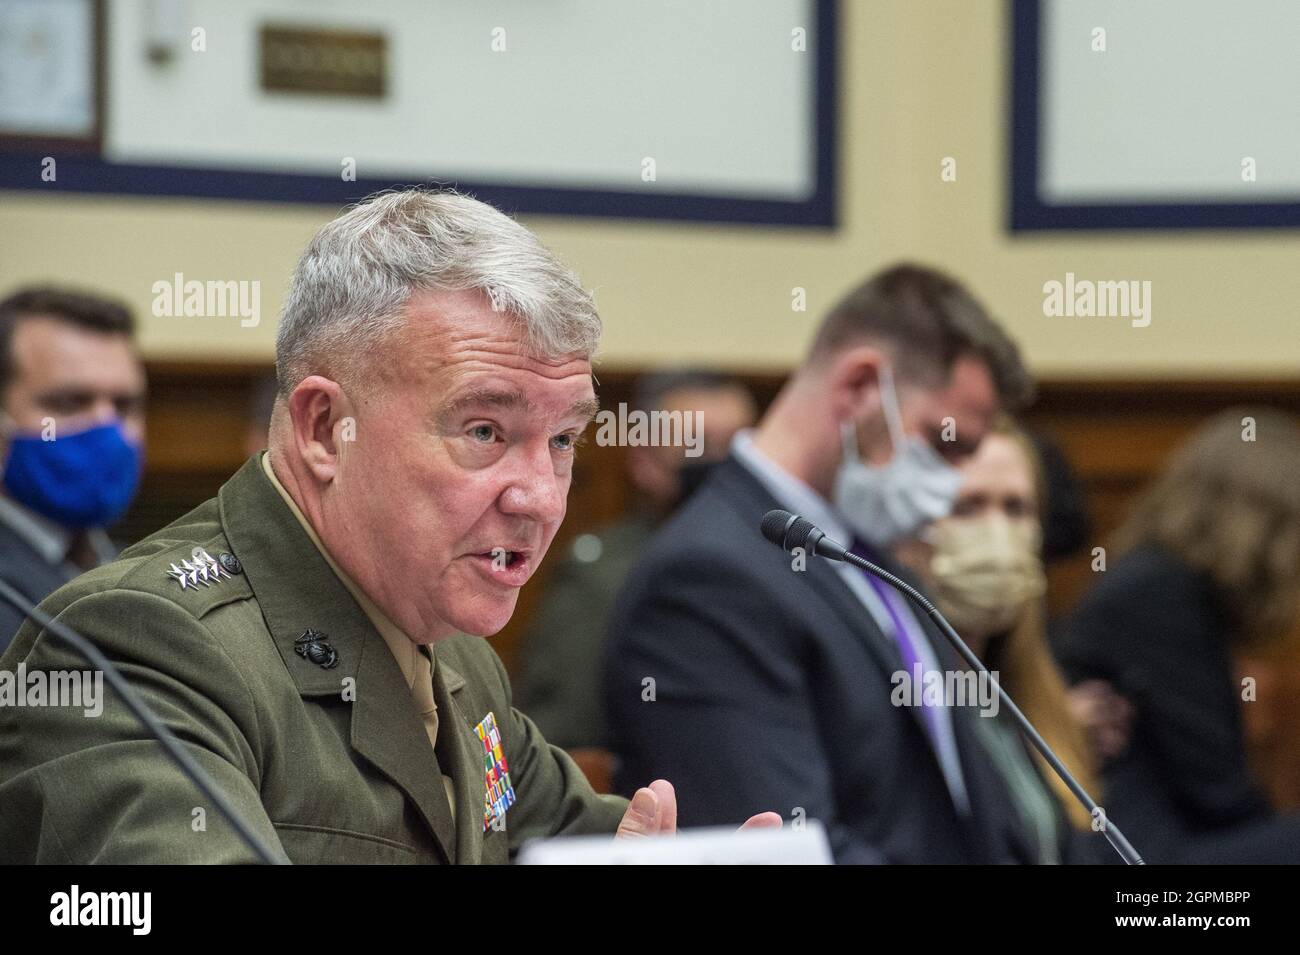 General Kenneth McKenzie Jr., USMC Commander, U.S. Central Command responds to questions during a House Armed Services Committee hearing on 'Ending the U.S. Military Mission in Afghanistan' in the Rayburn House Office Building in Washington, DC, USA, Wednesday, September 29, 2021. Photo by Rod Lamkey/Pool via CNP/ABACAPRESS.COM Stock Photo